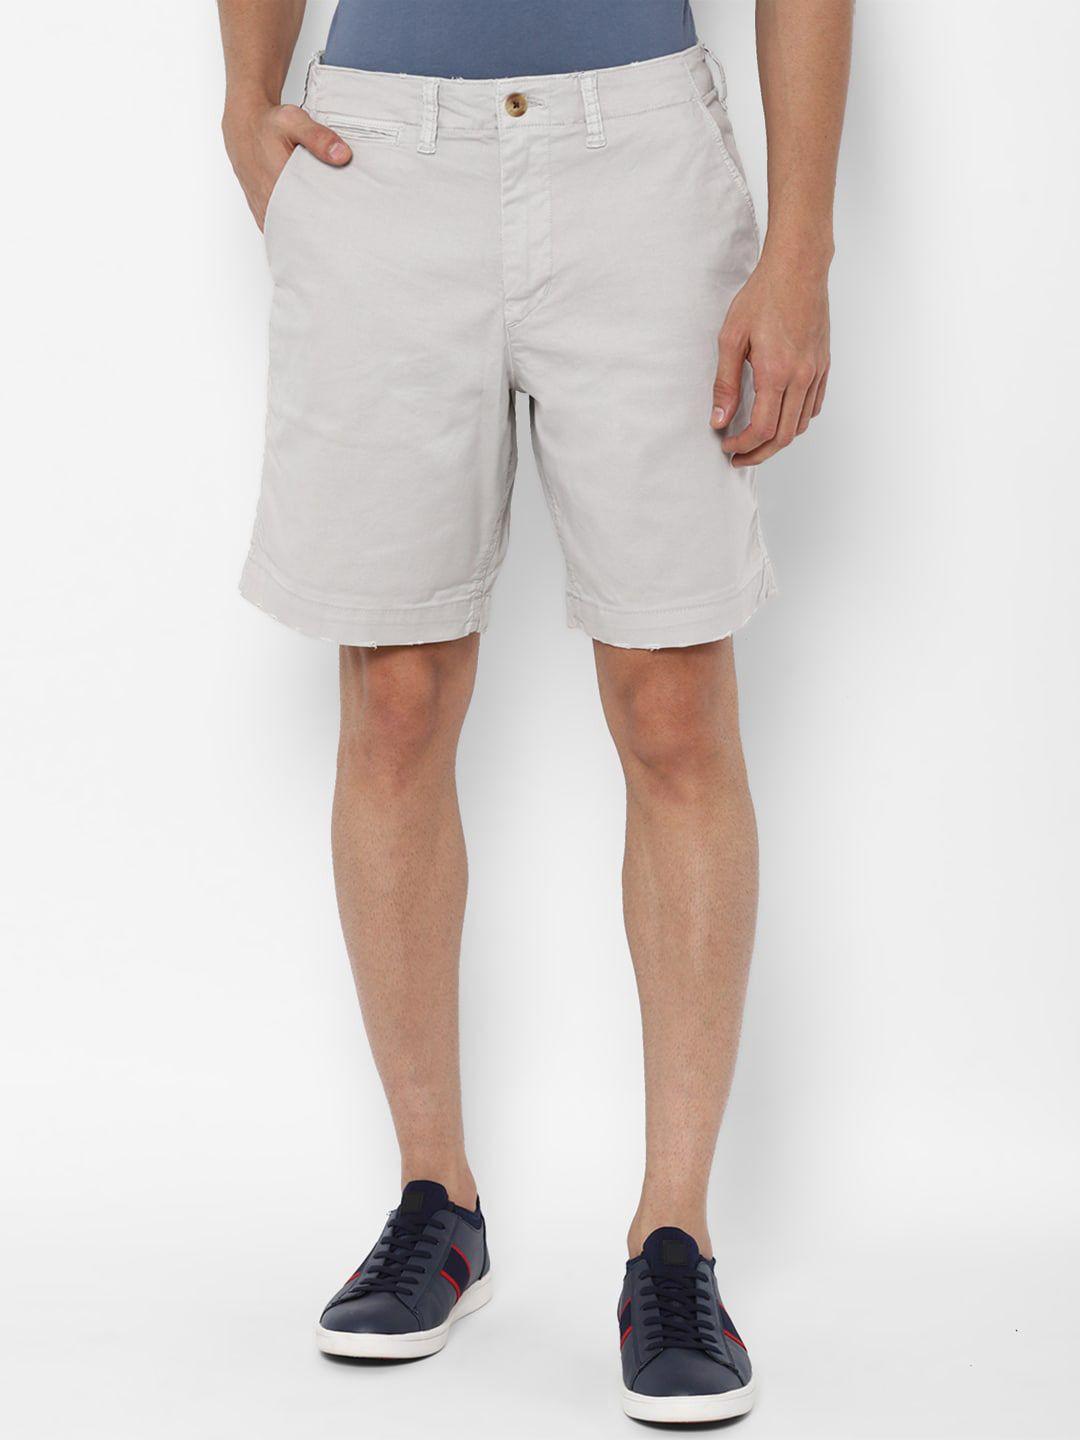 american-eagle-outfitters-men-grey-mid-rise-shorts